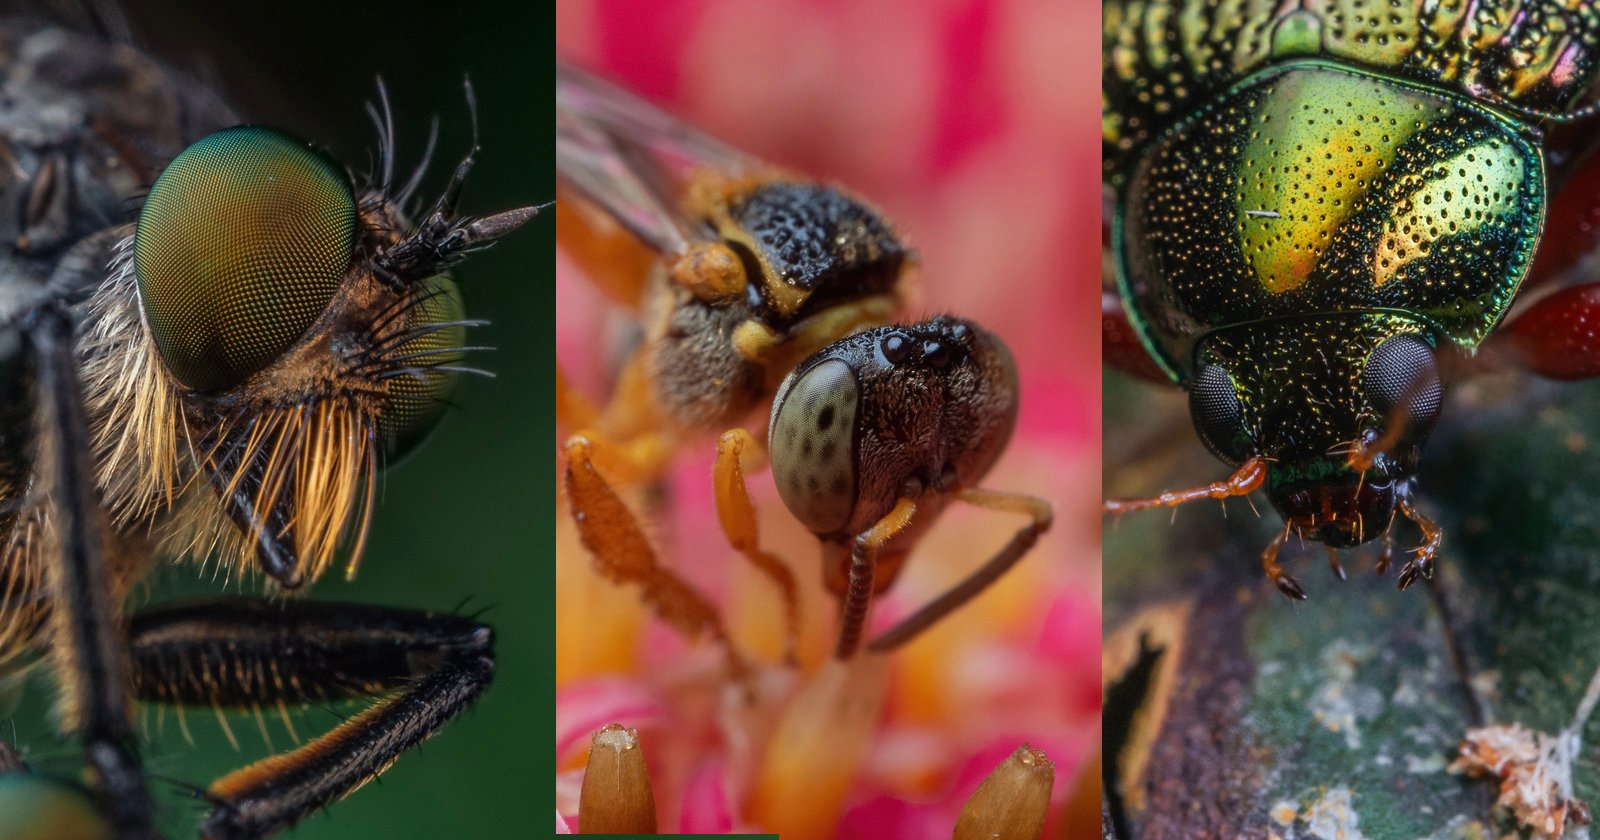 Evaluating the Laowa 50mm f/2.8 Macro Photographing Insects in Brazil